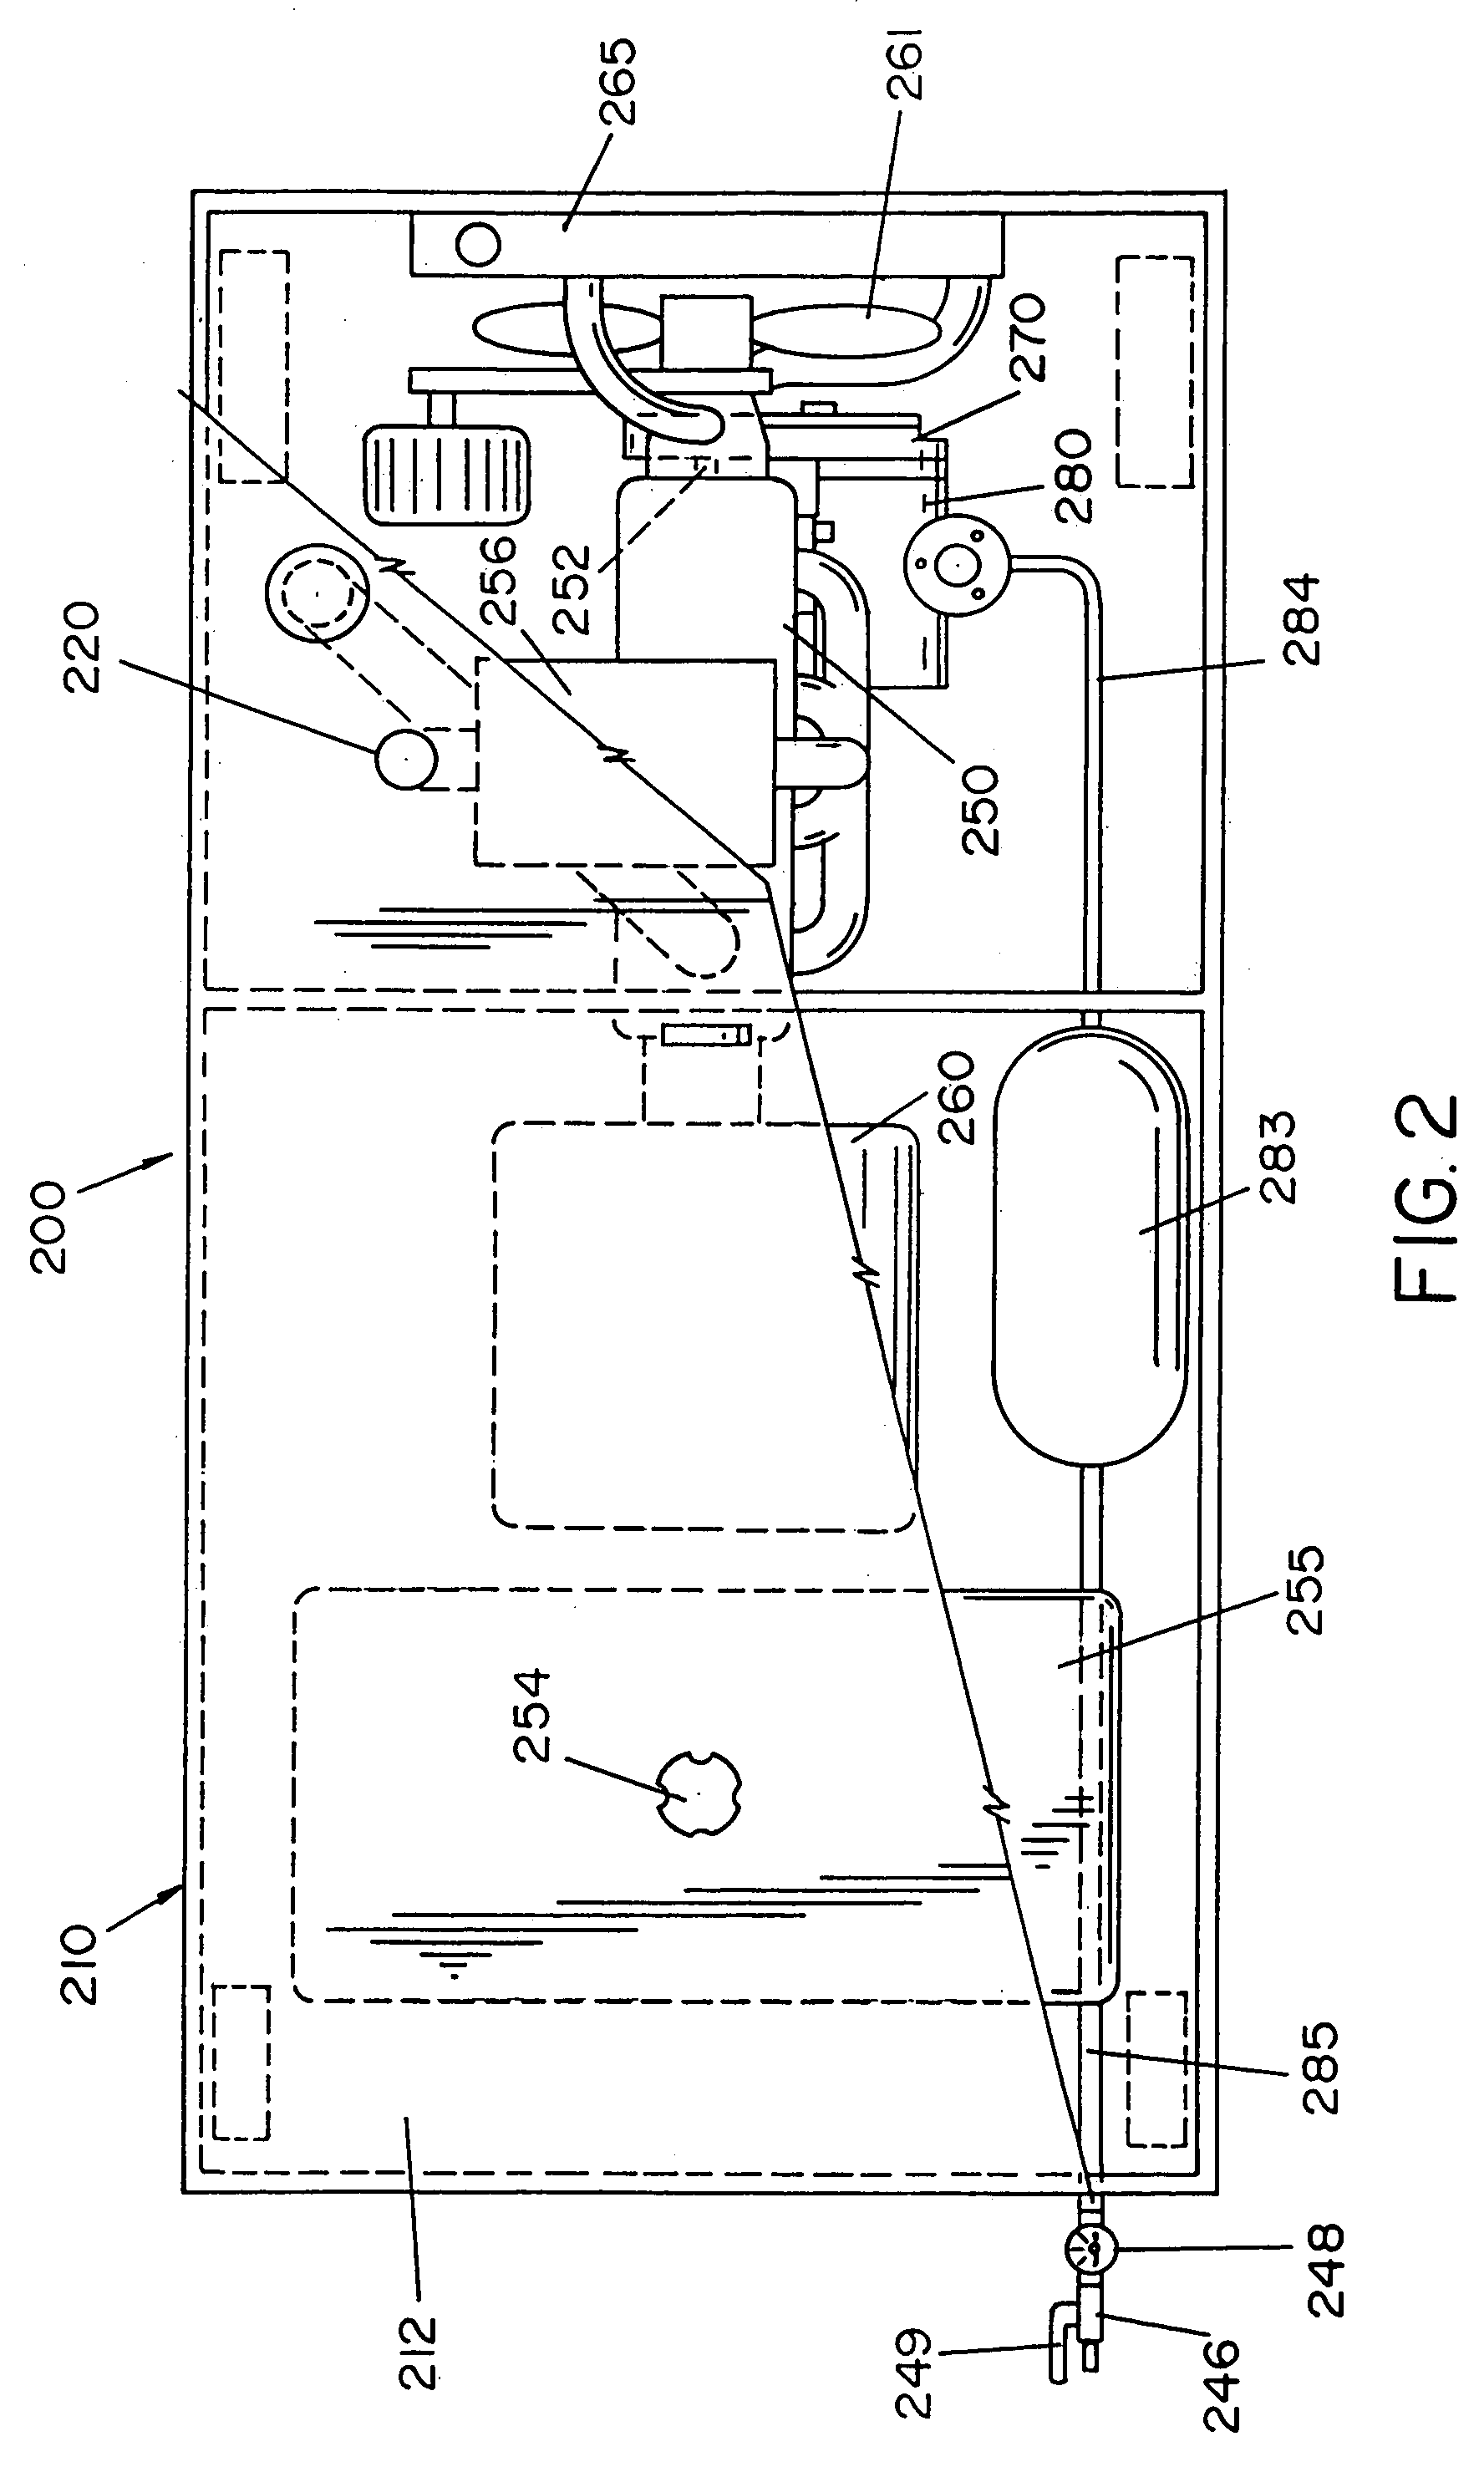 Self-contained integrated welder/generator and compressor